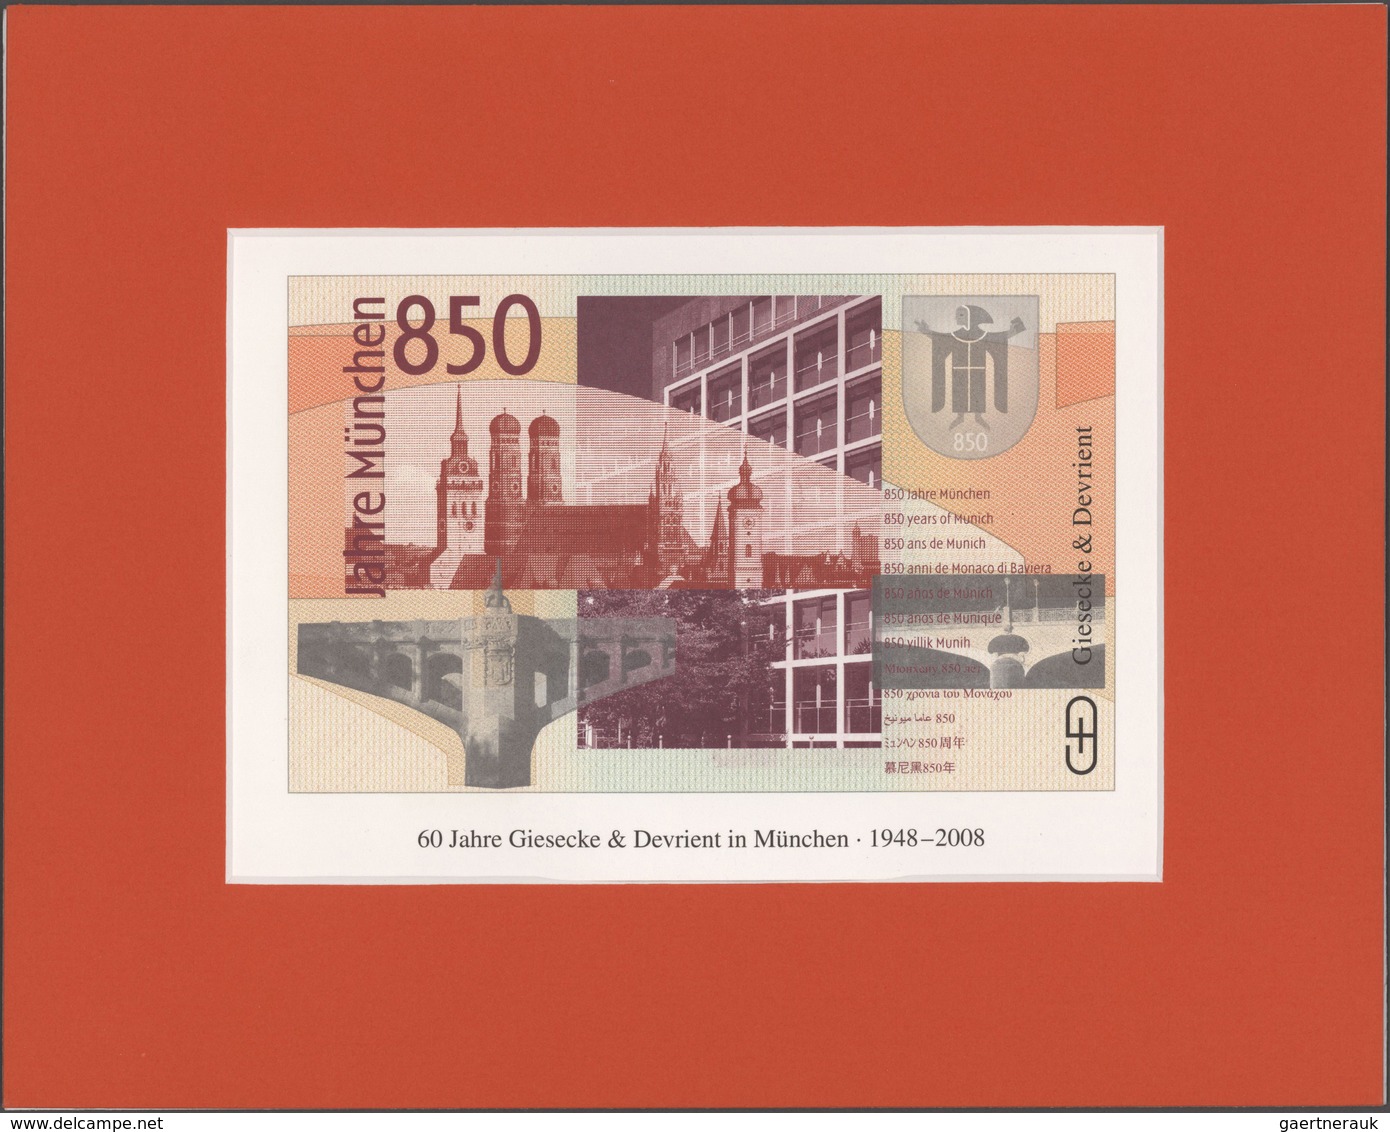 Testbanknoten: Very Rare Advertising Note By Giesecke & Devrient For The 850th Anniversary Of The Ci - Fiktive & Specimen